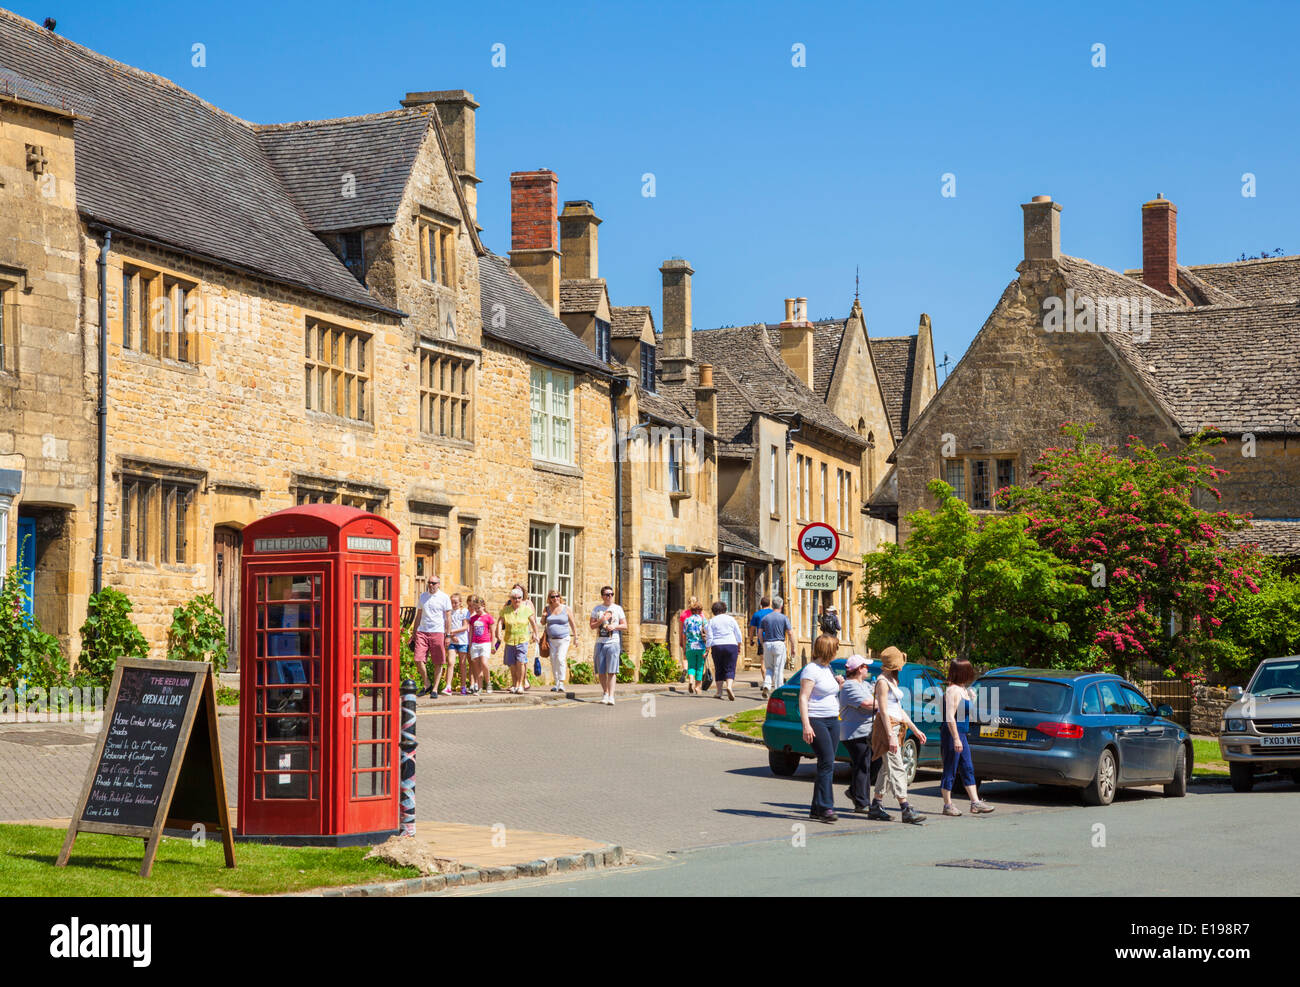 Cotswolds Village of Chipping Campden with people shopping on the High Street, Chipping Campden, The Cotswolds Gloucestershire England UK GB Europe Stock Photo